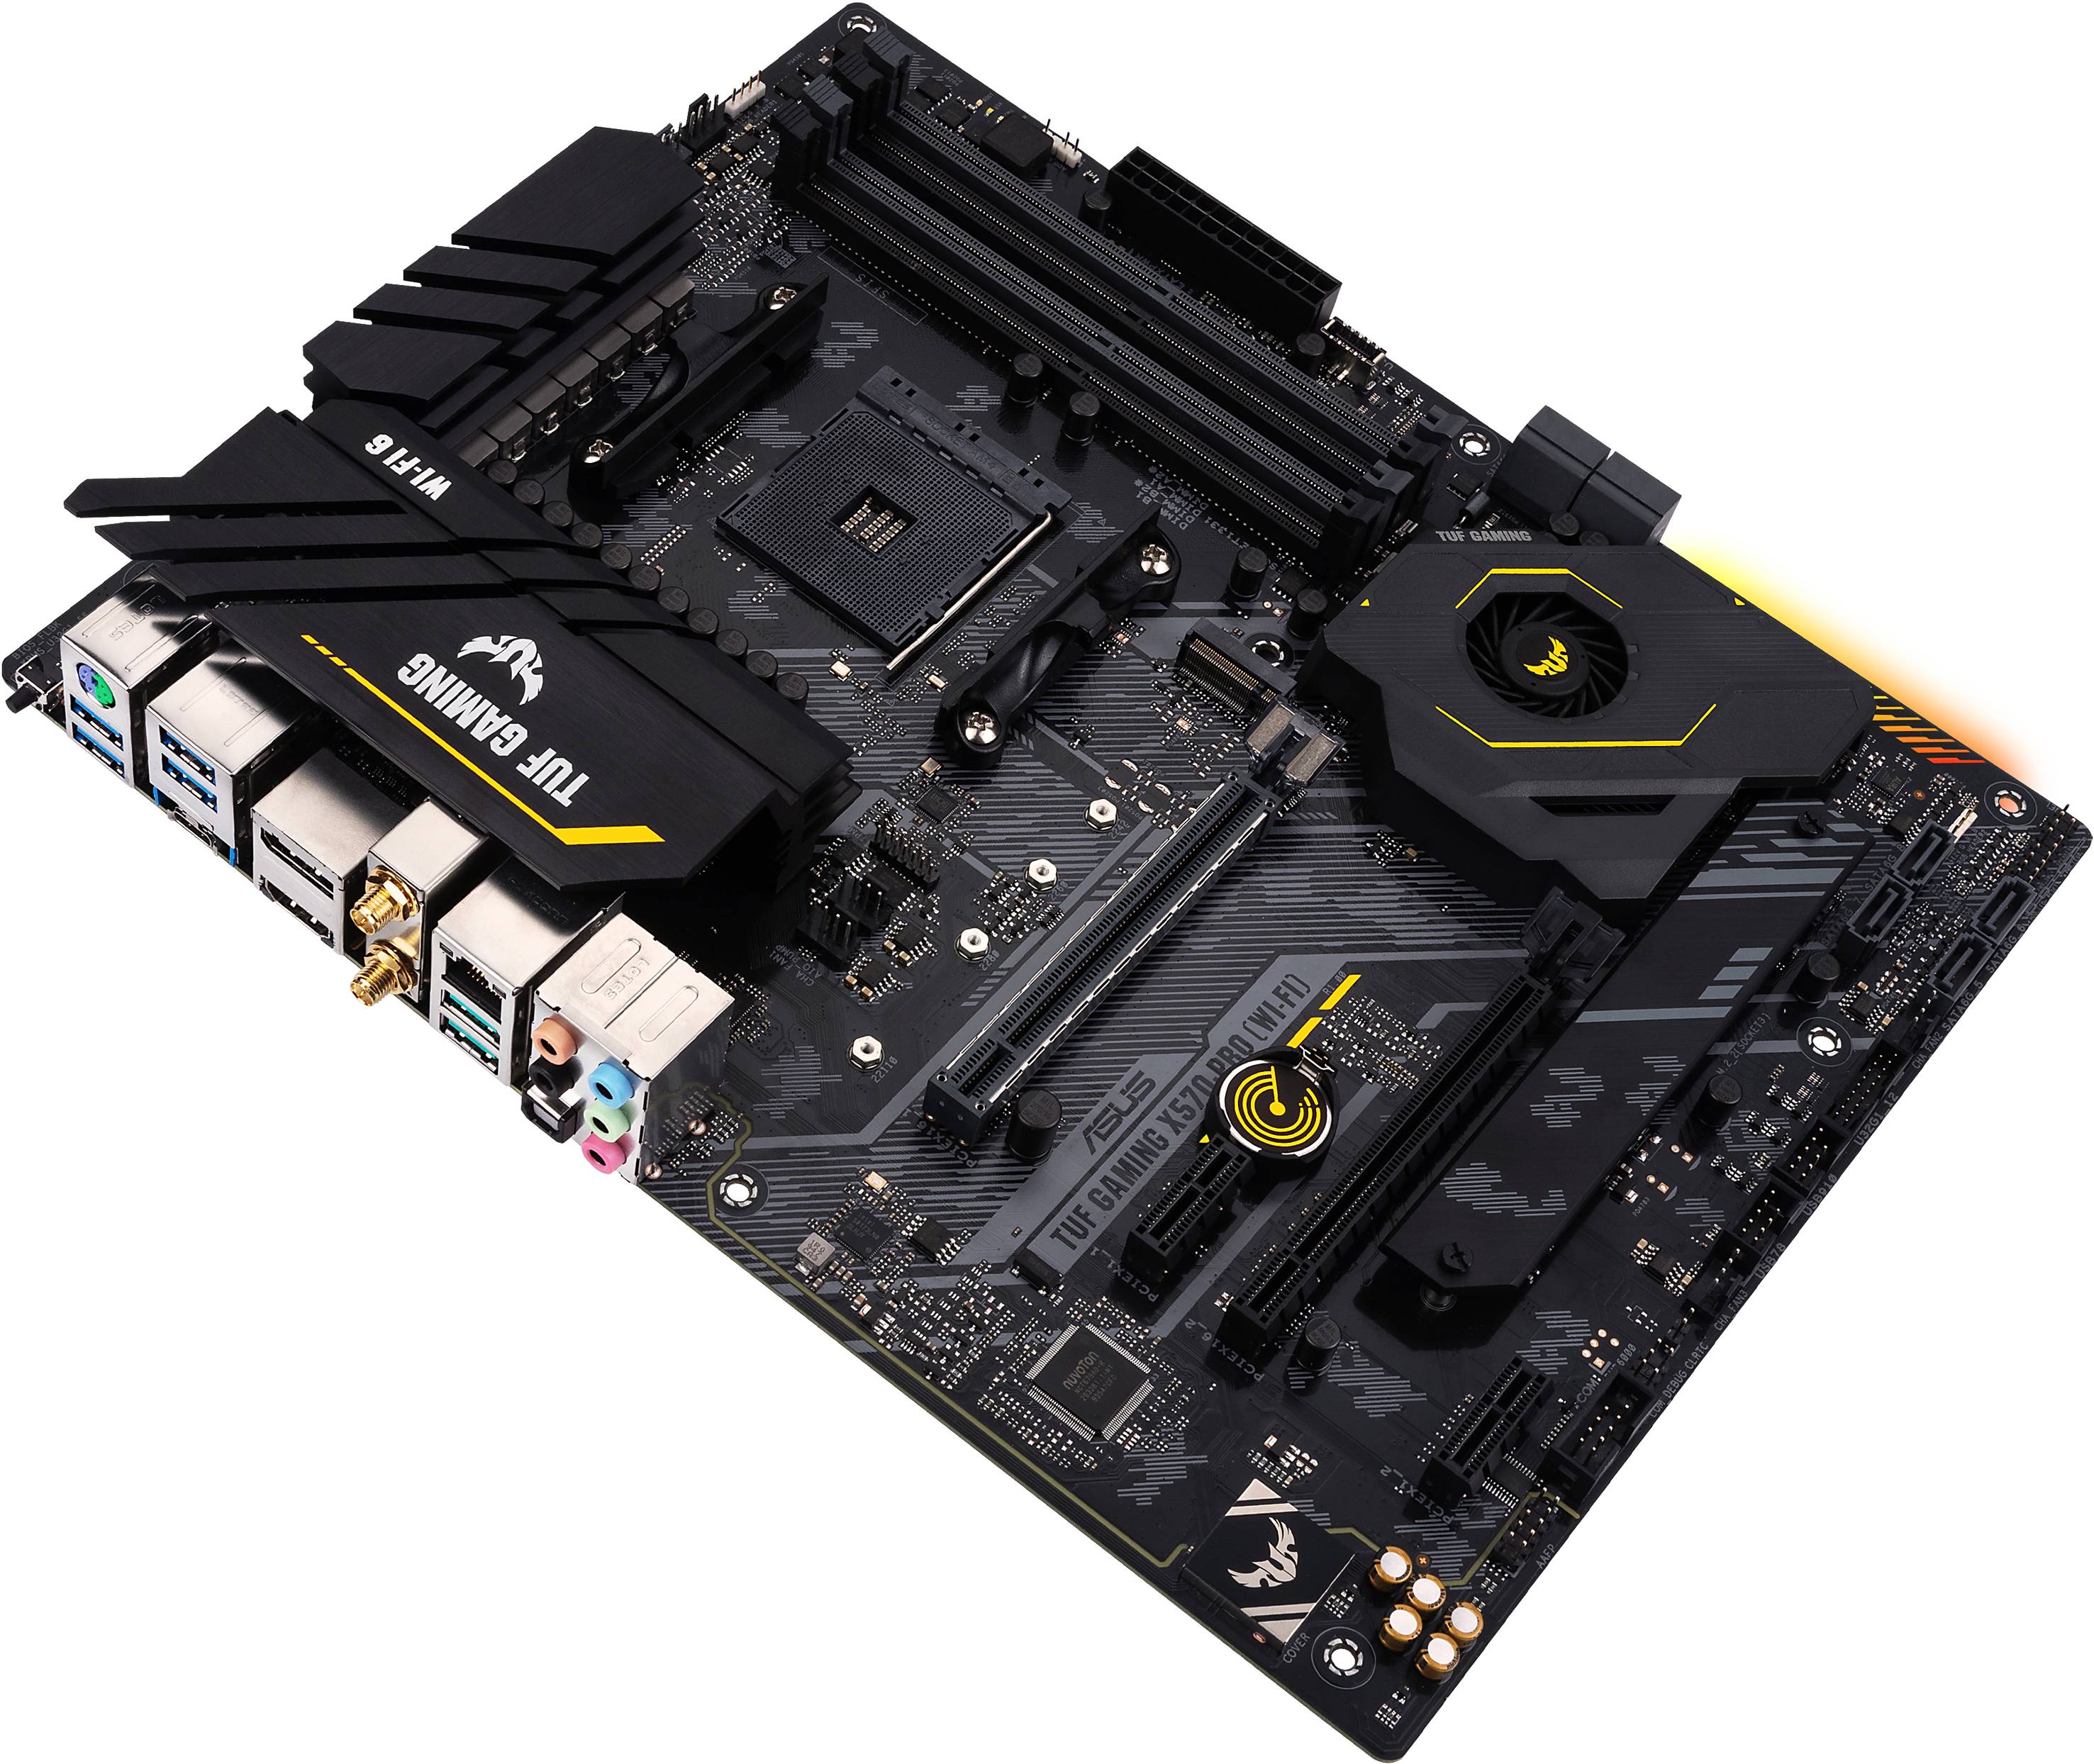 asus-tuf-gaming-x570-pro-wi-fi-motherboard-pc-base-amd-am4-form